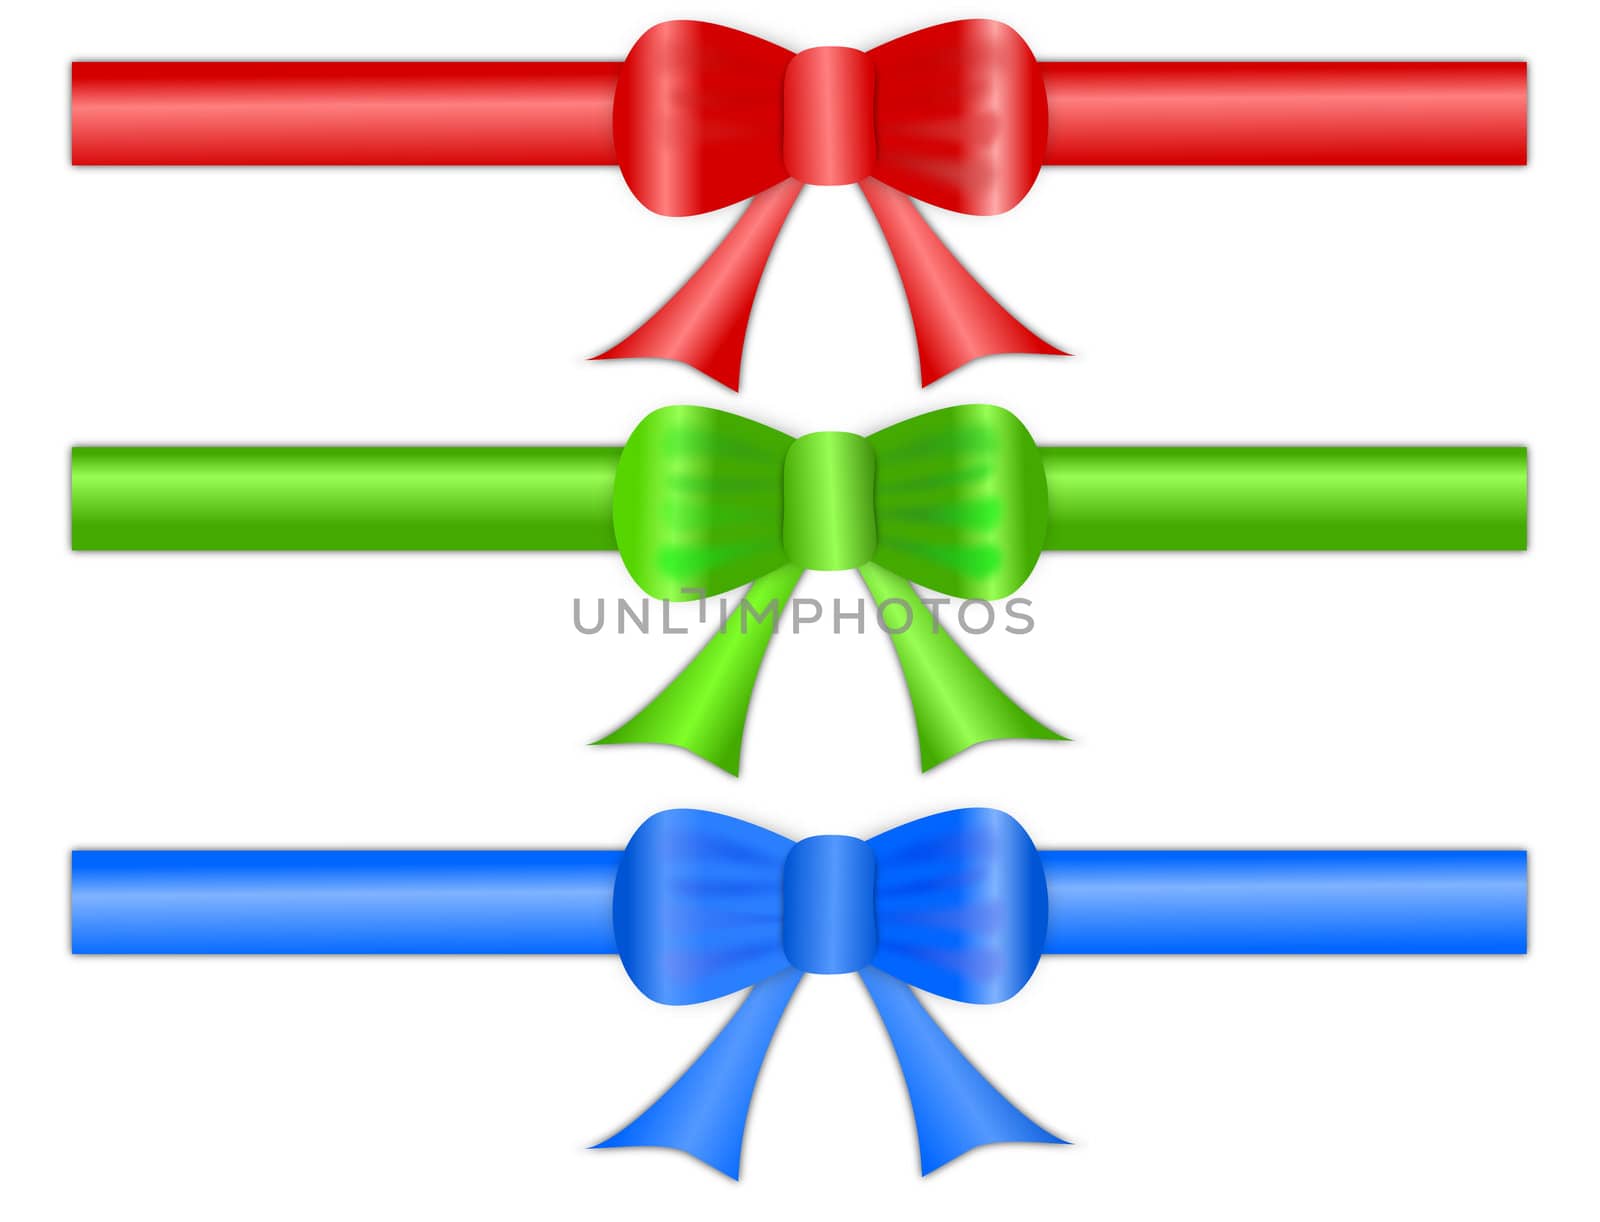 A set of three festive gift ribbon bows in shiny satin like material, for page headers and footers